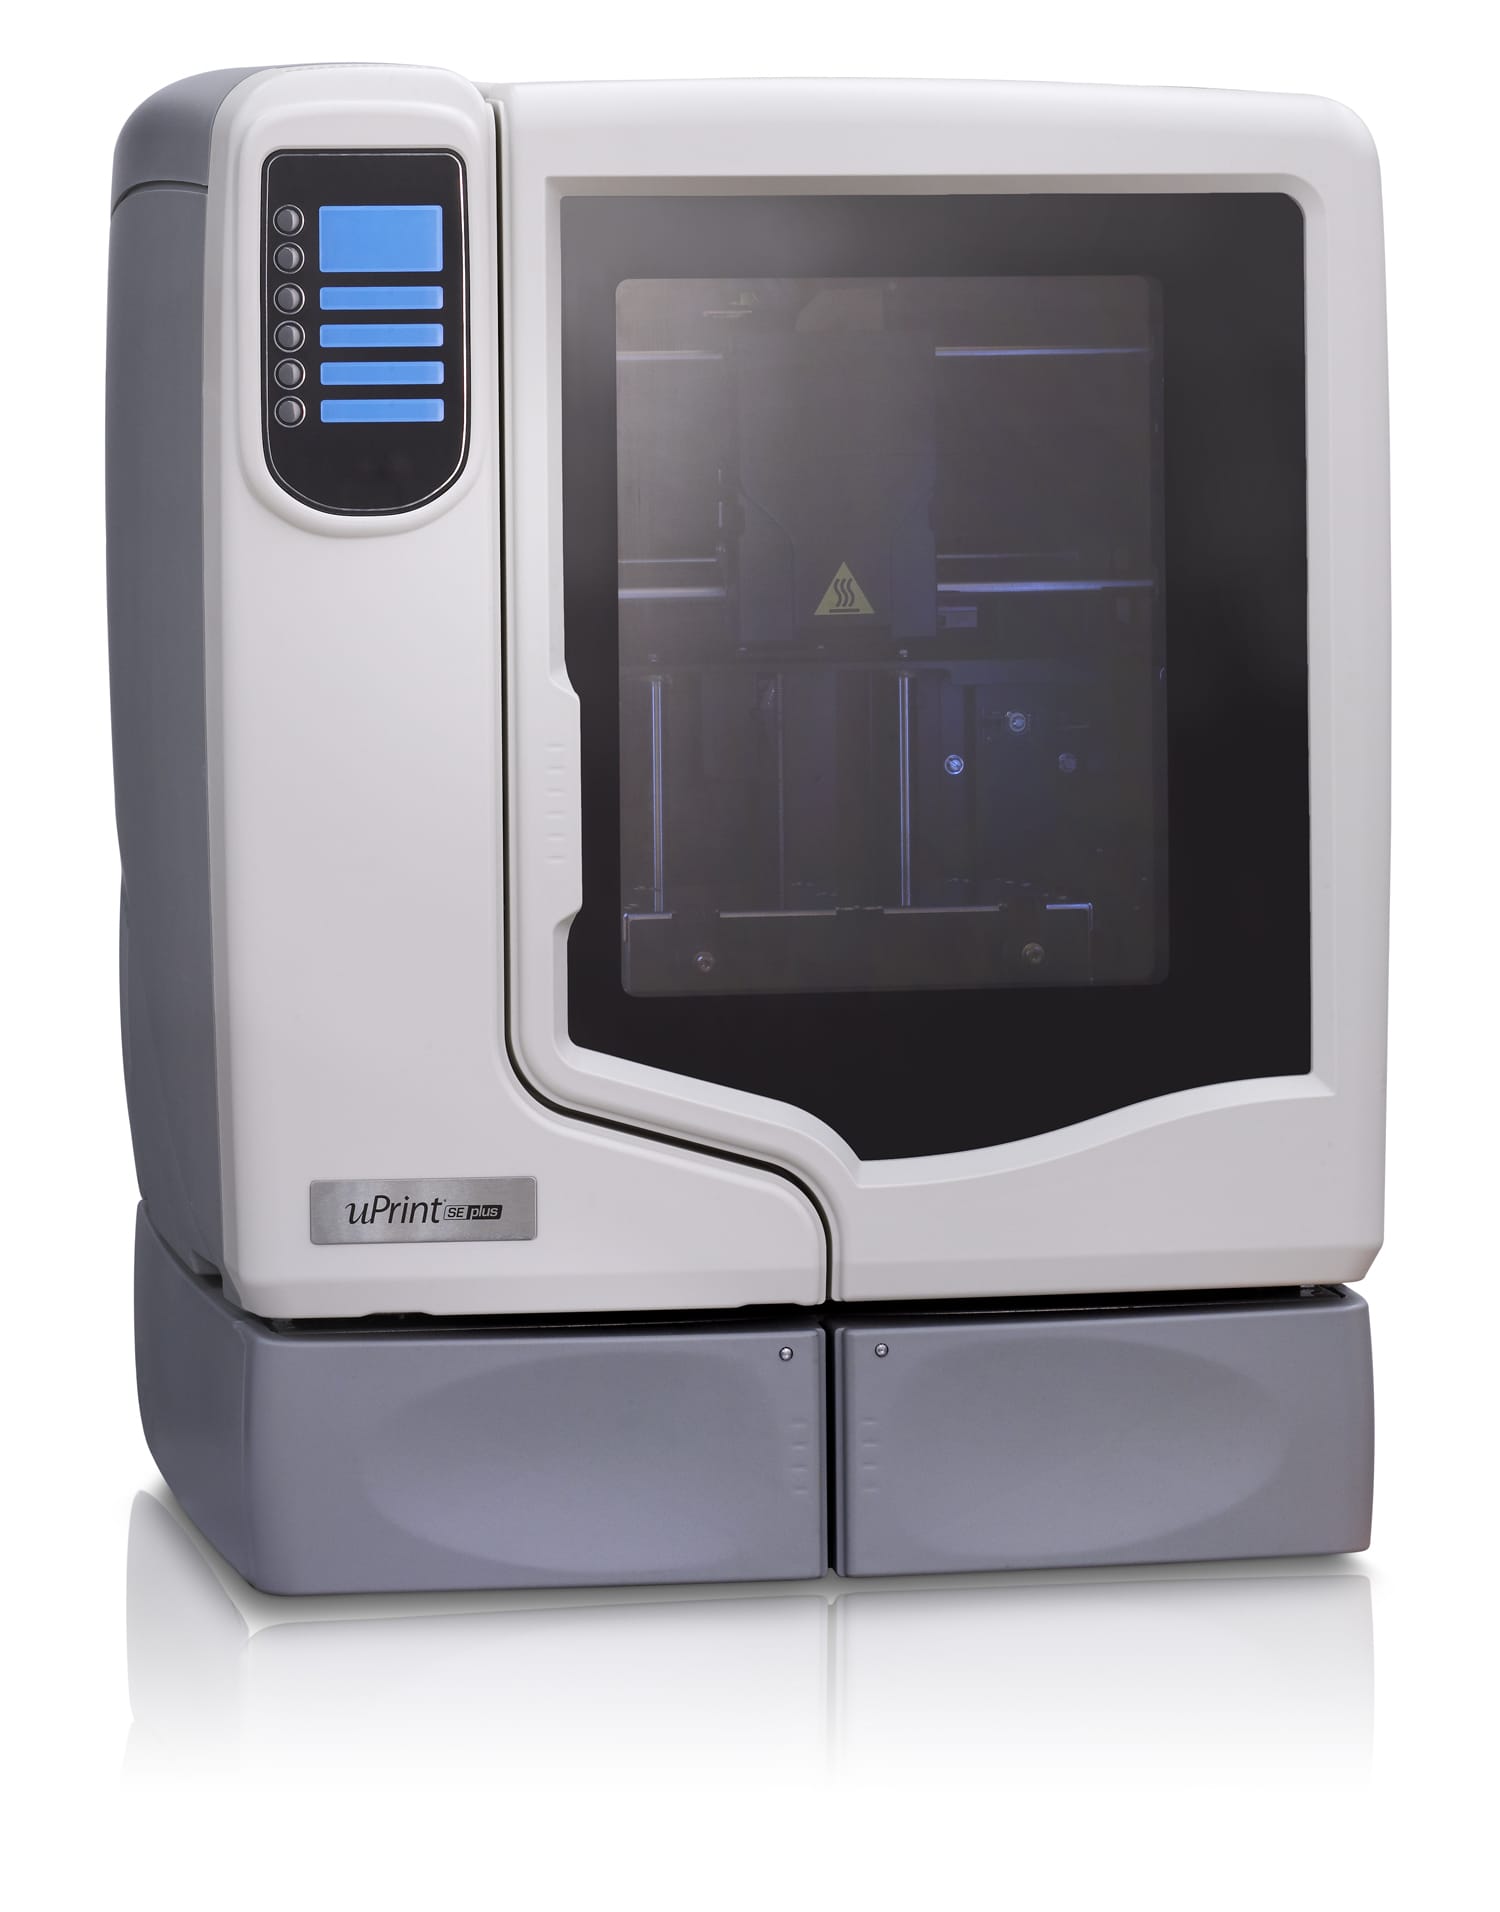  The venerable uPrint, historically one of Stratasys' most popular 3D printers  